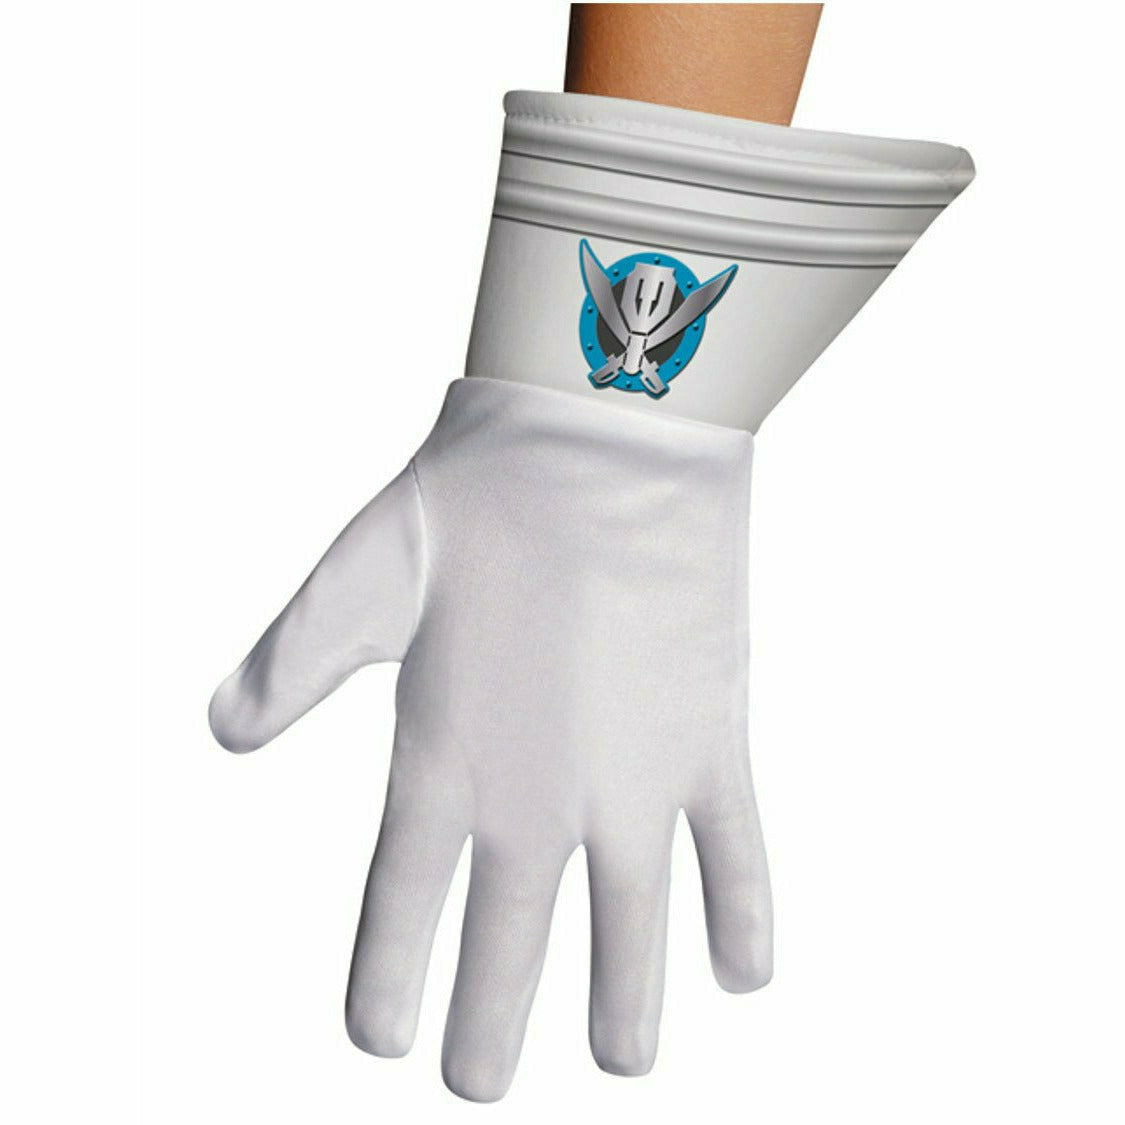 Disguise COSTUMES: ACCESSORIES Power Rangers Super Megaforce Gloves